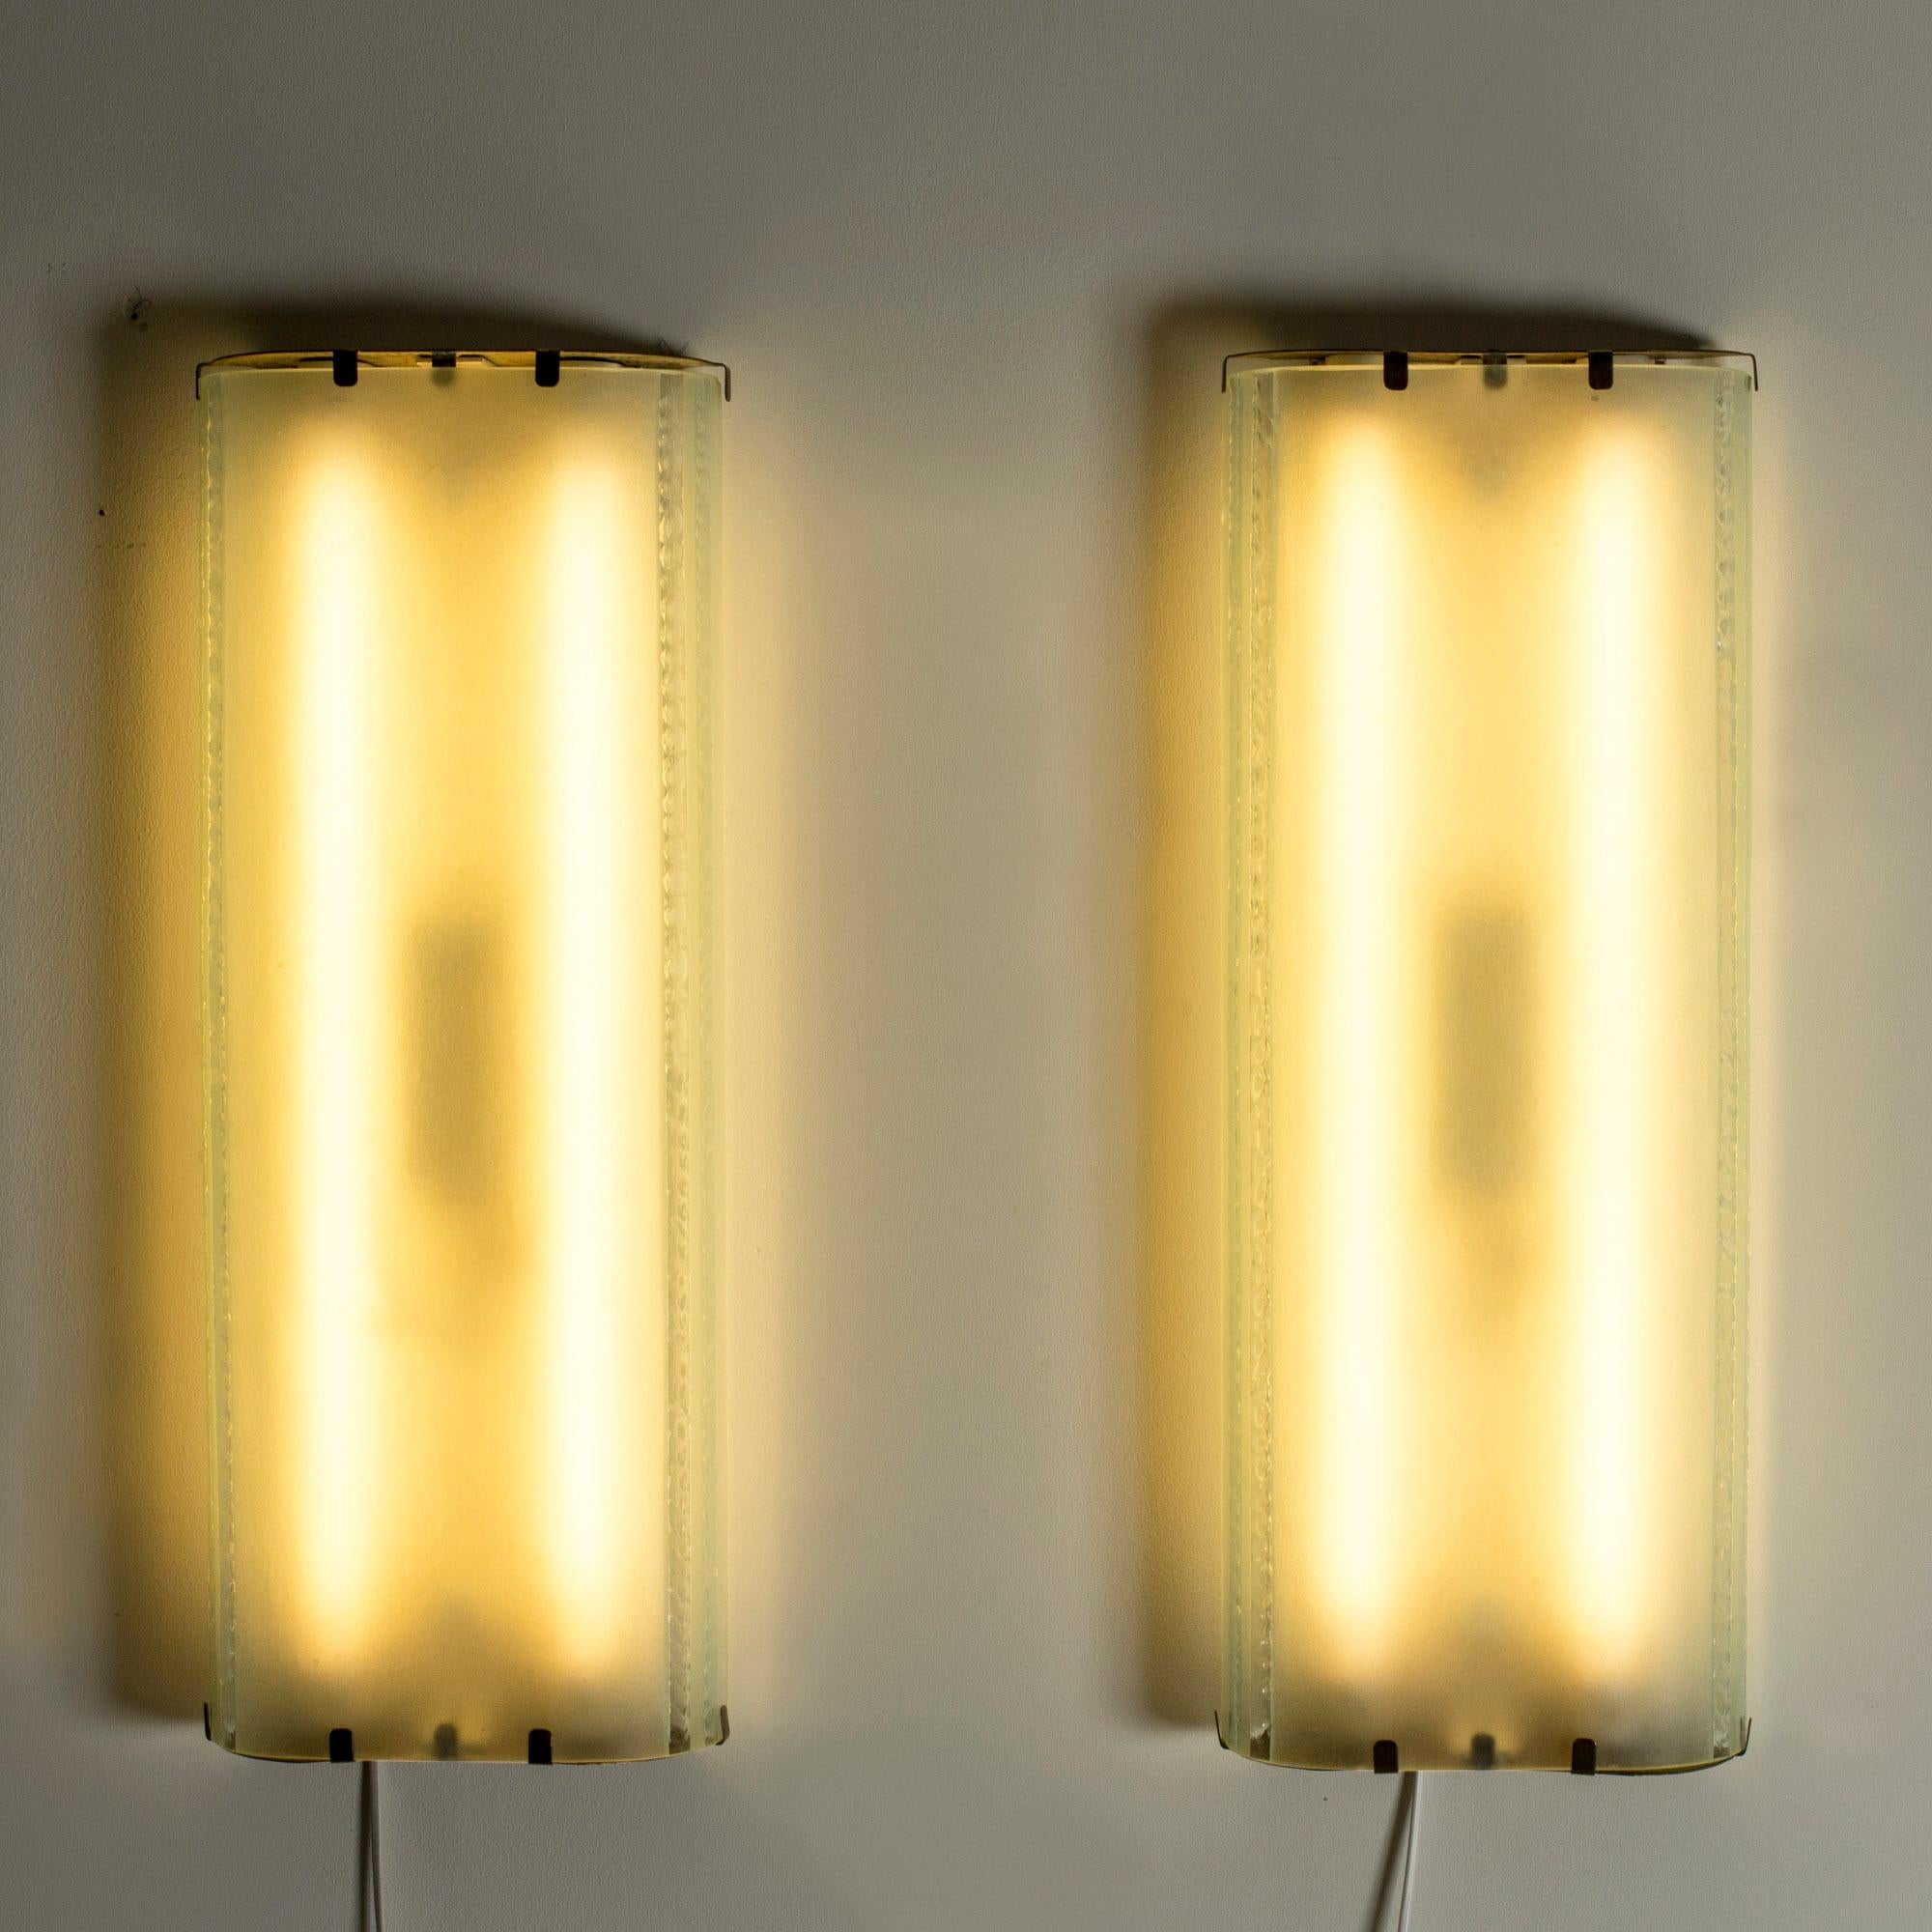 Pair of large, flush mount Swedish Modern wall lights, made from glass and brass. Thick frosted glass with a decorative pattern along the edges. Brass sections hold the glass in place, beautifully decorated in a pattern of perfortated holes.